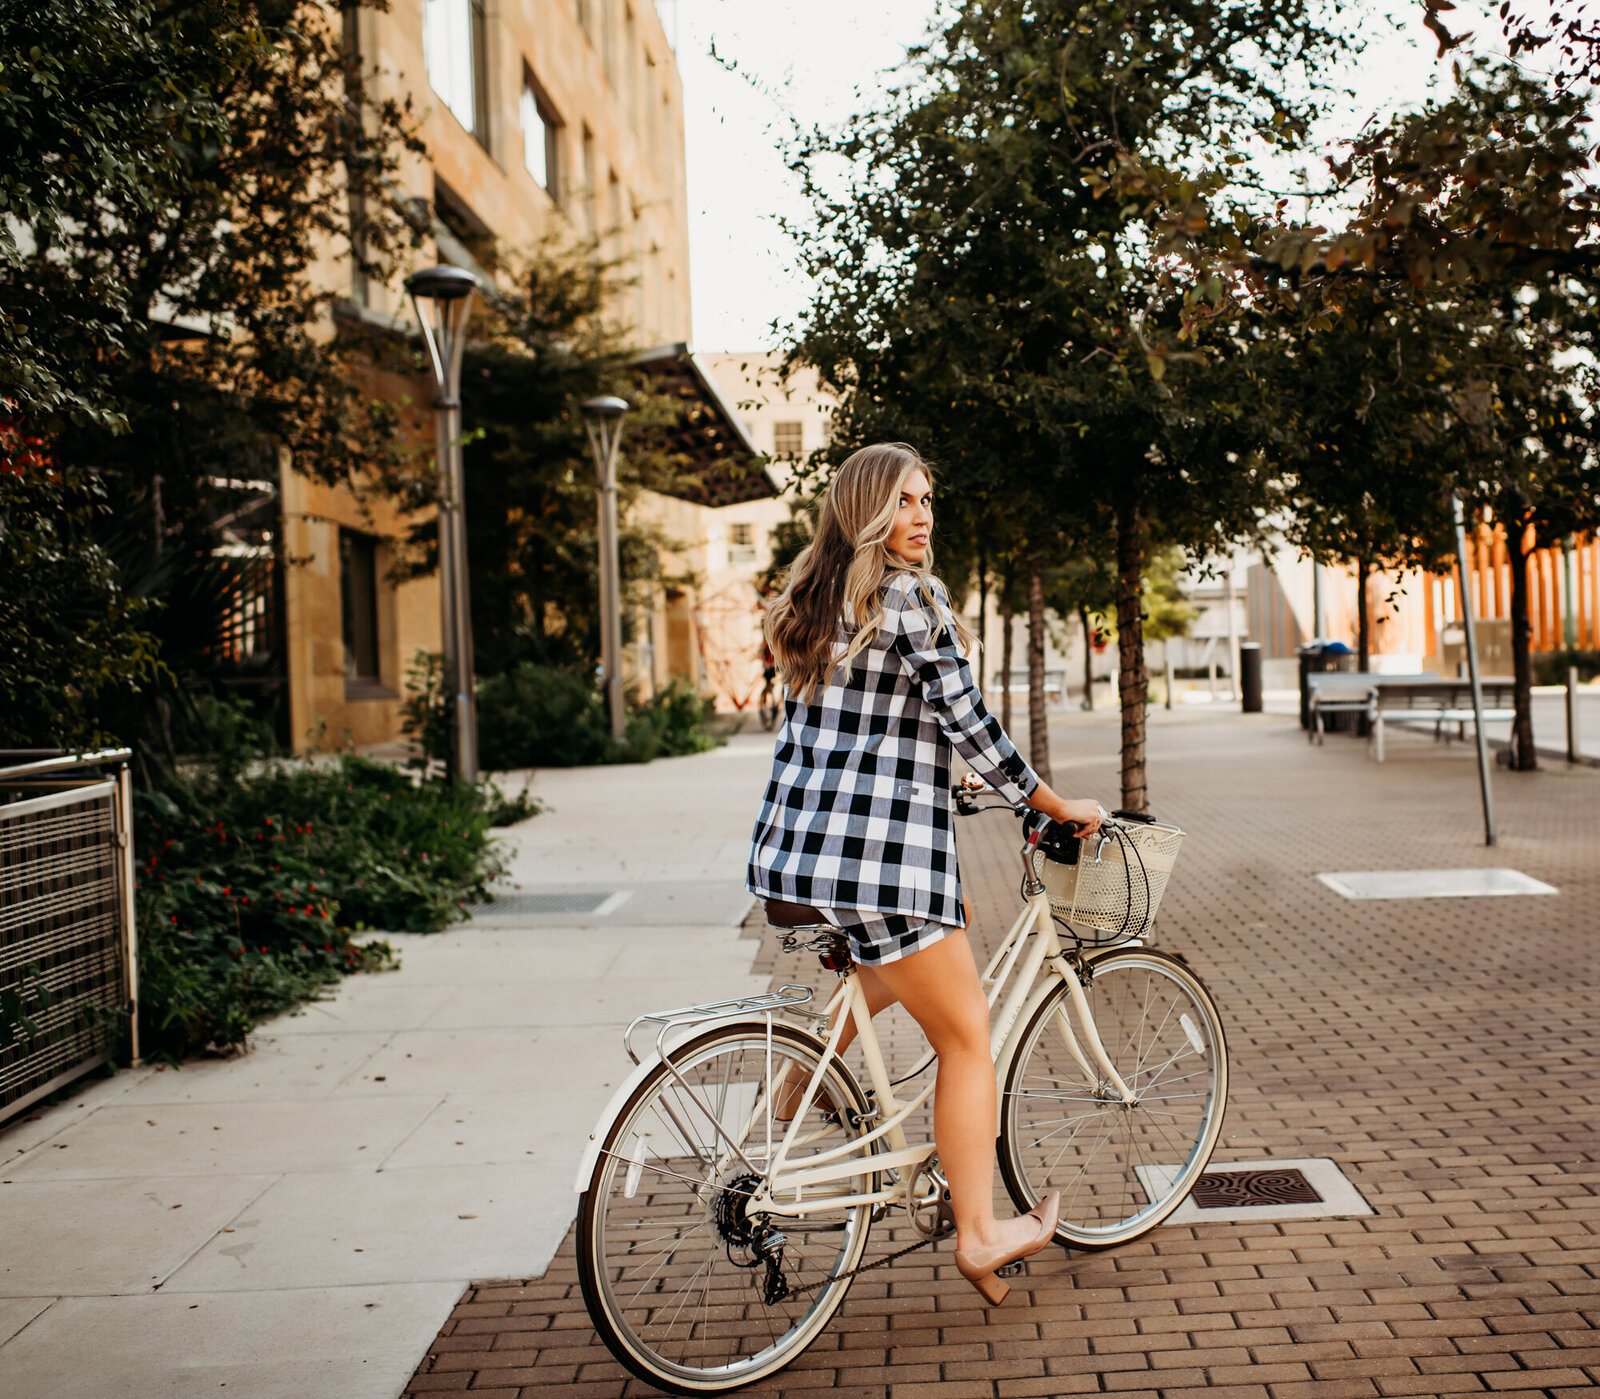 Branding Photographer, woman sits on bike in town